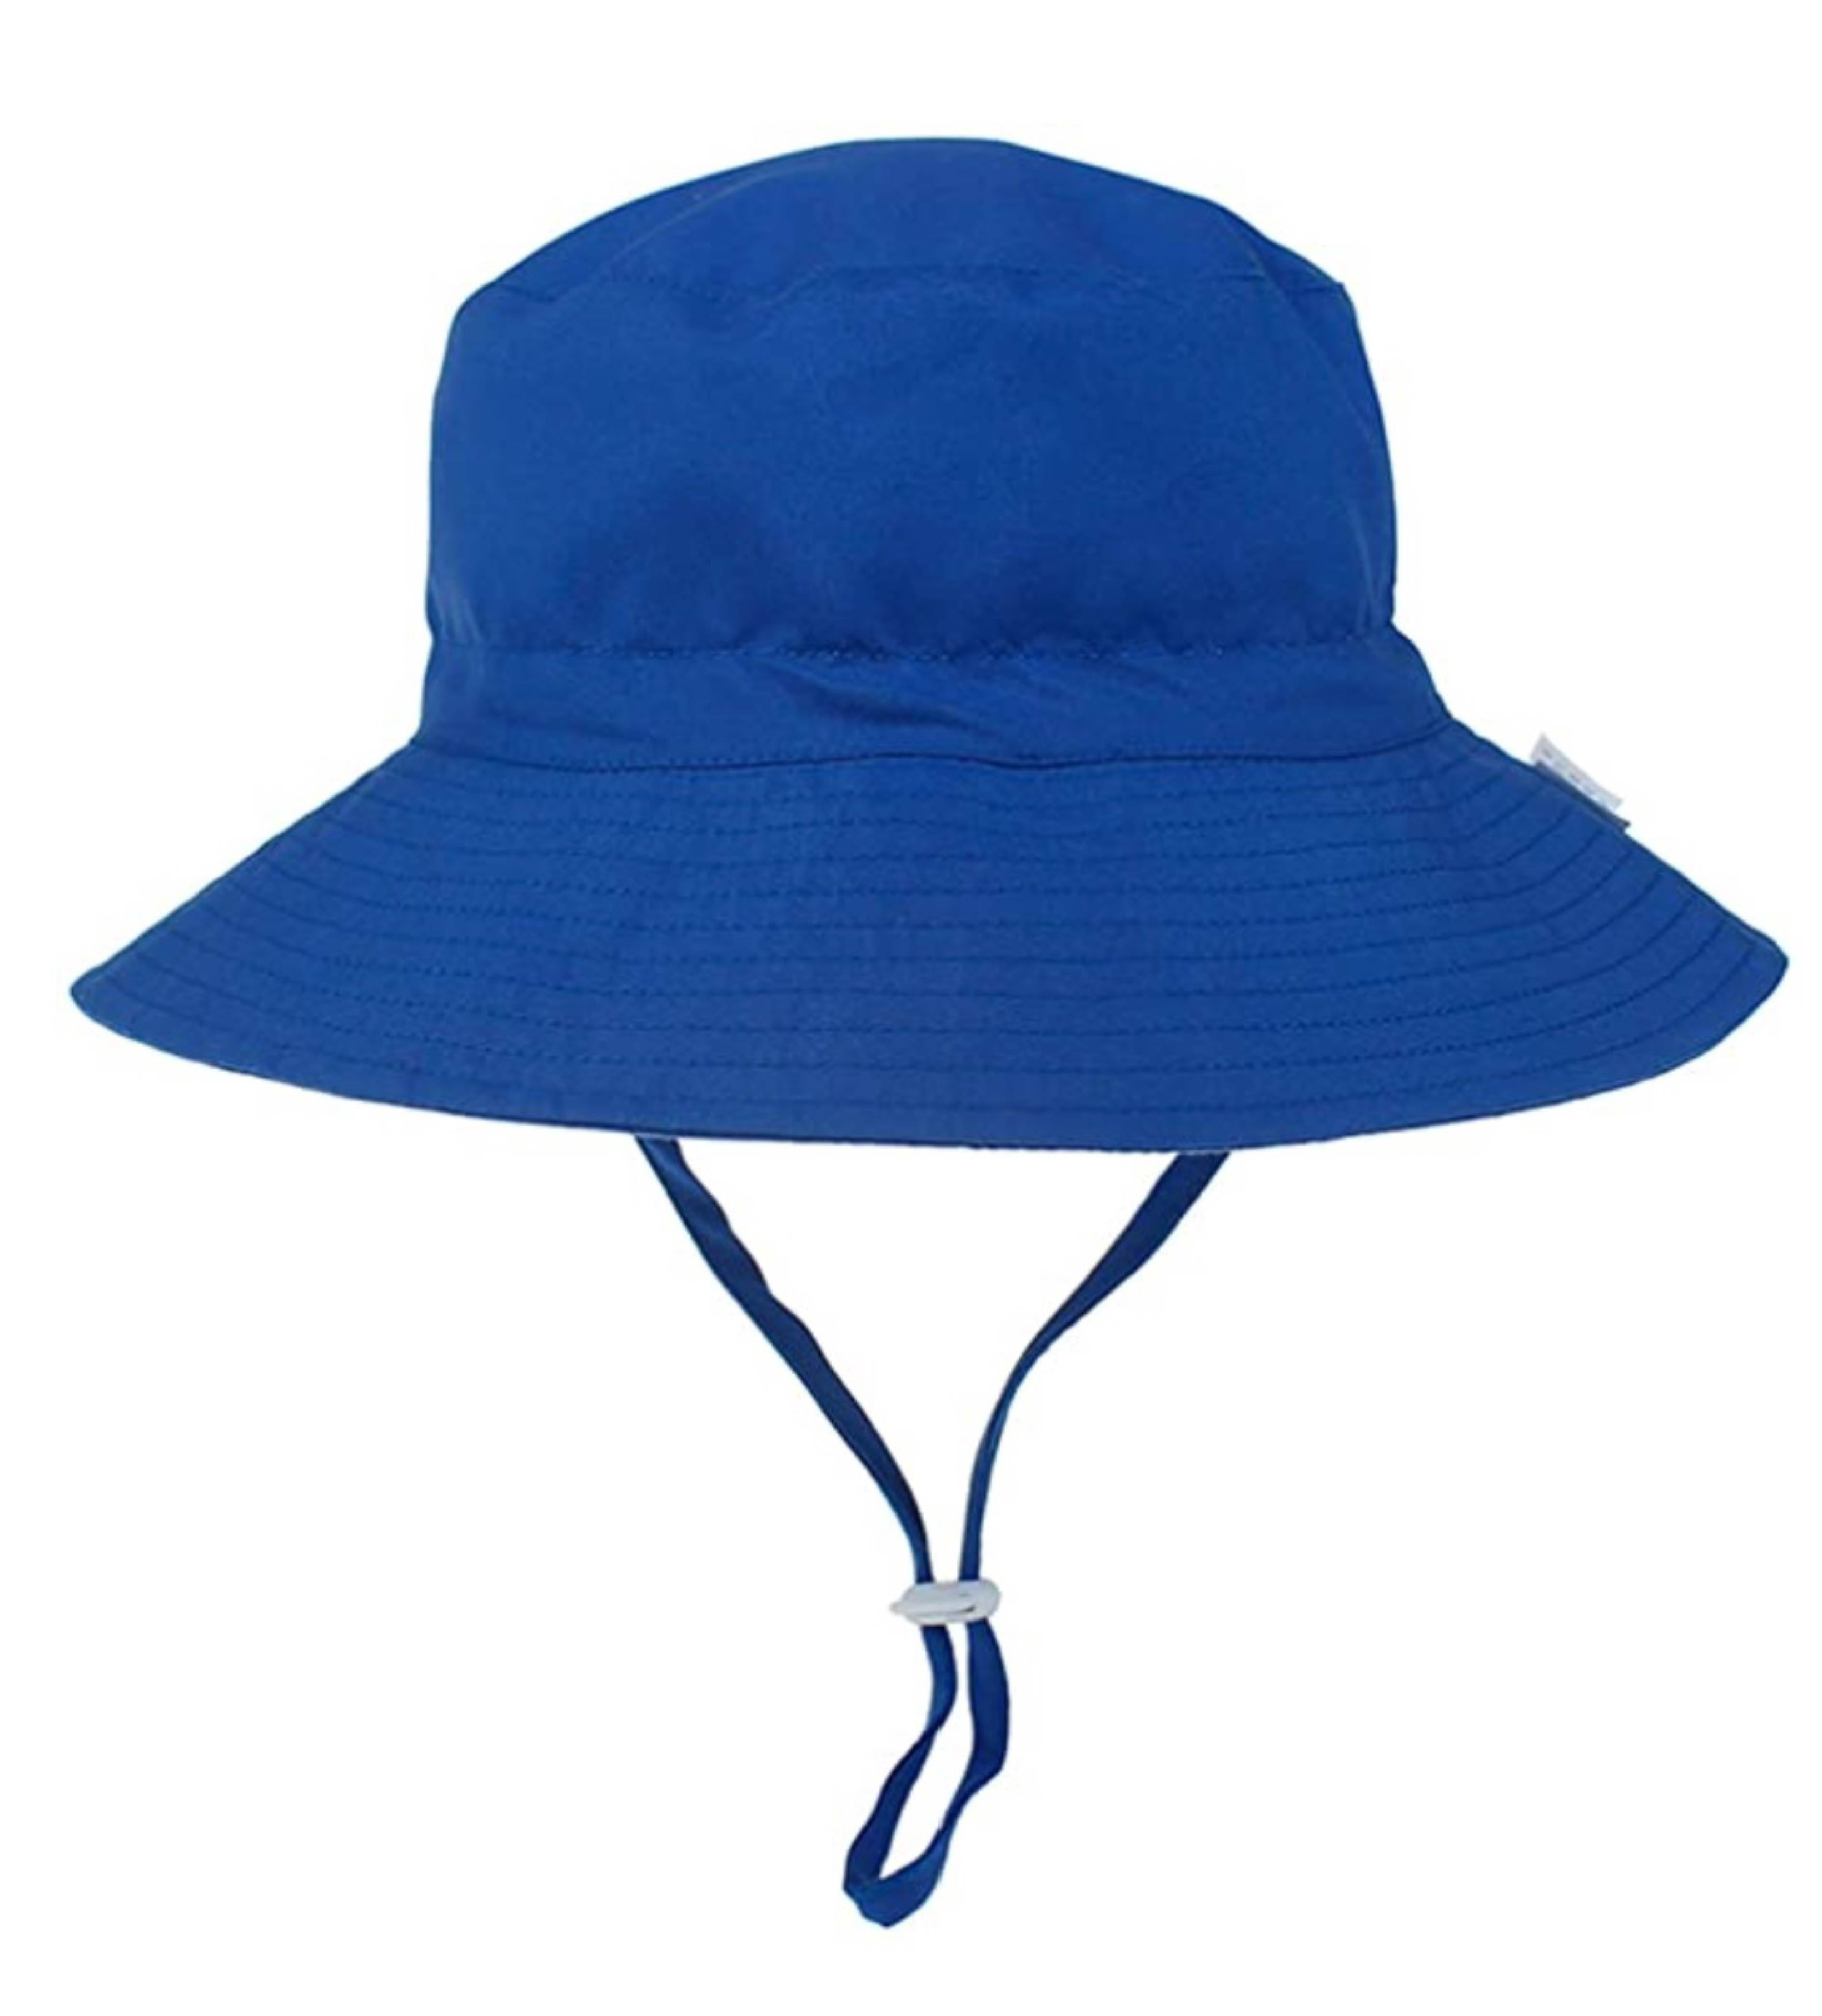 Blanks for Crafters Toddler, Sun Protection Bucket Hat (Royal Blue)